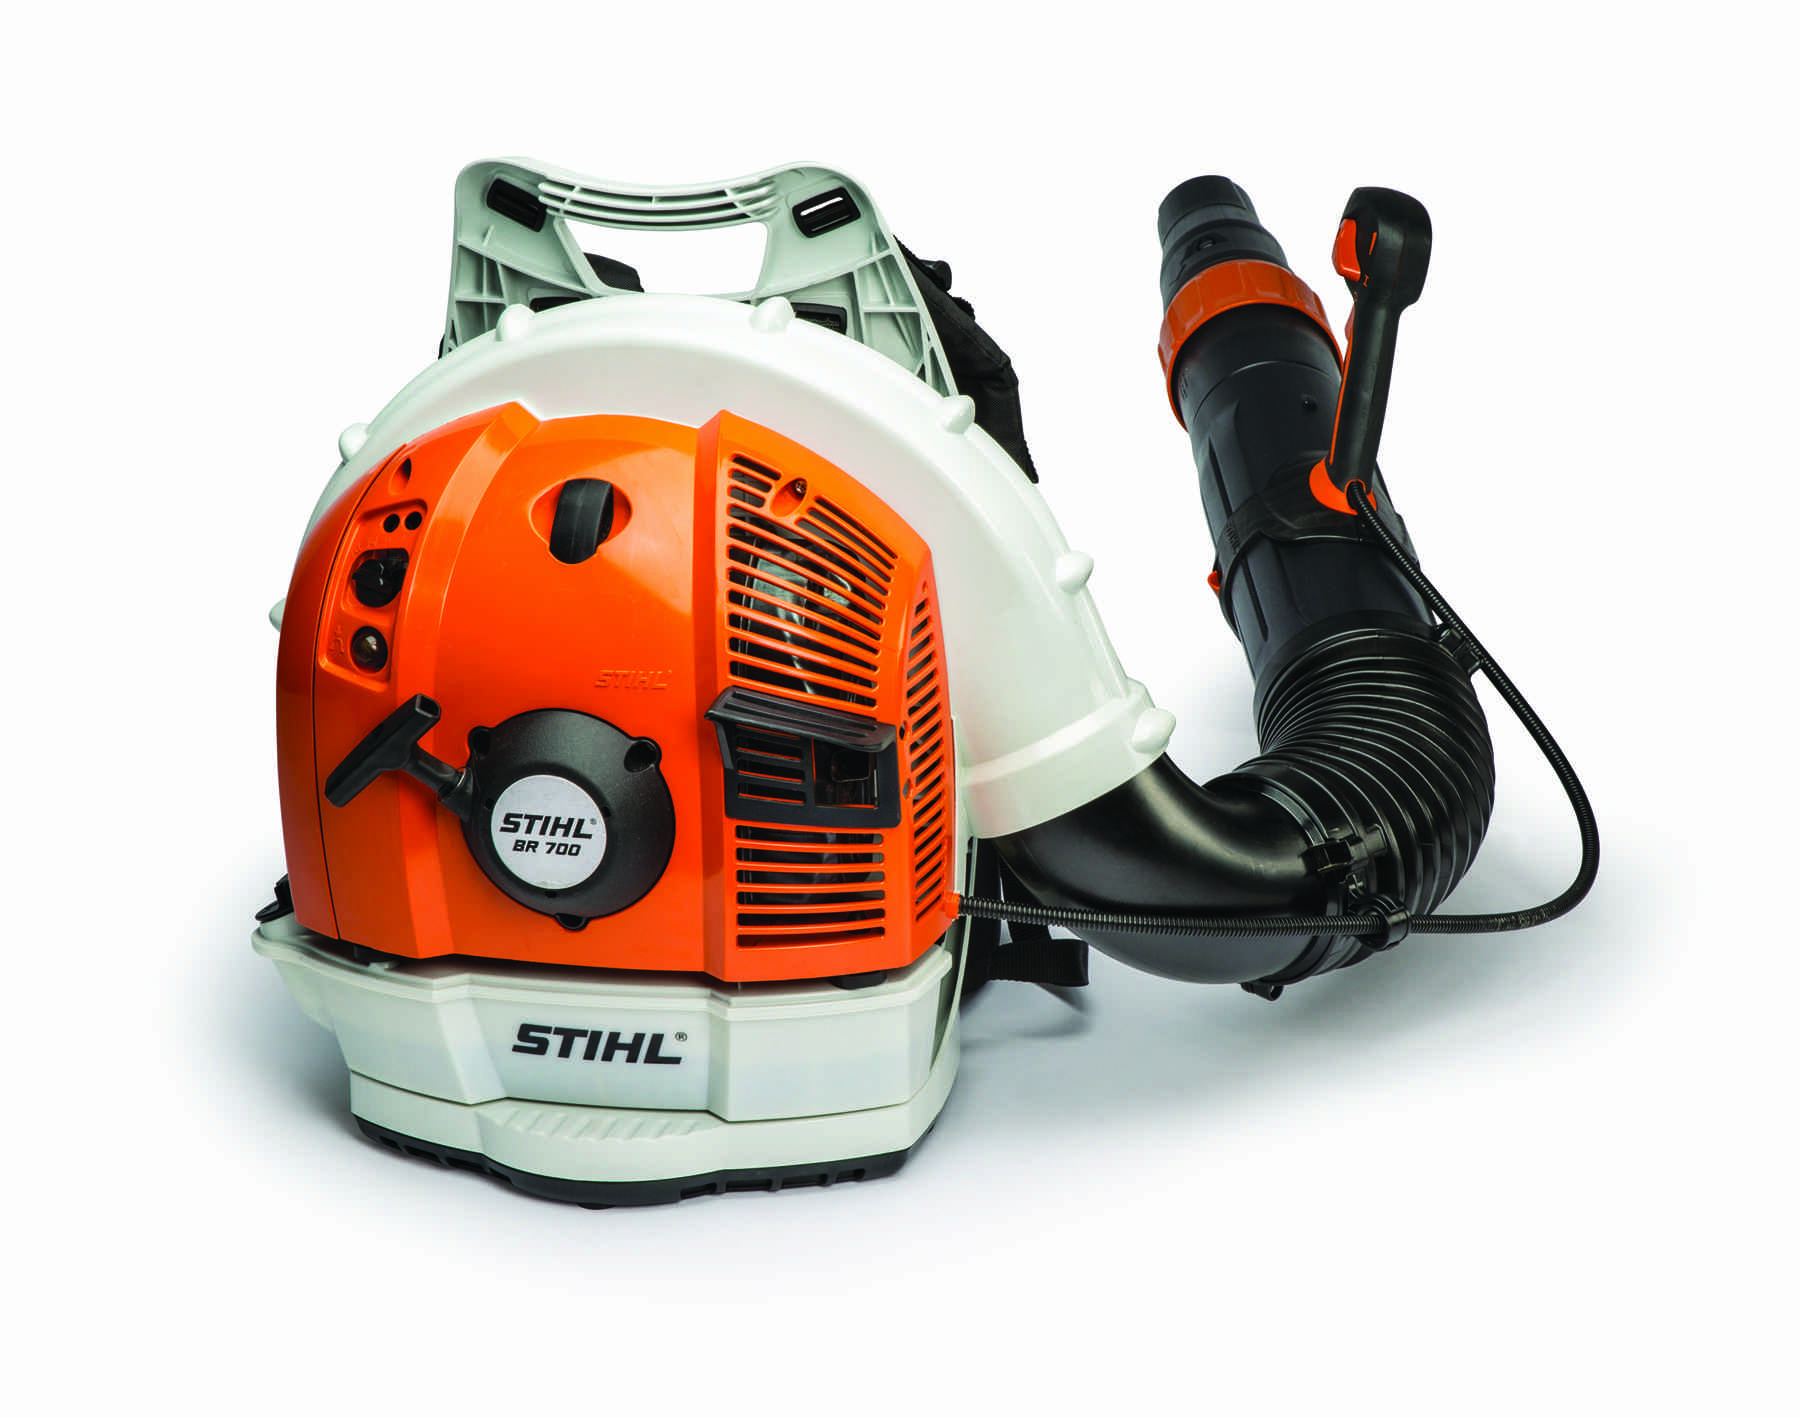 Stihl&#39;s new blower packs enough power to move wet leaves